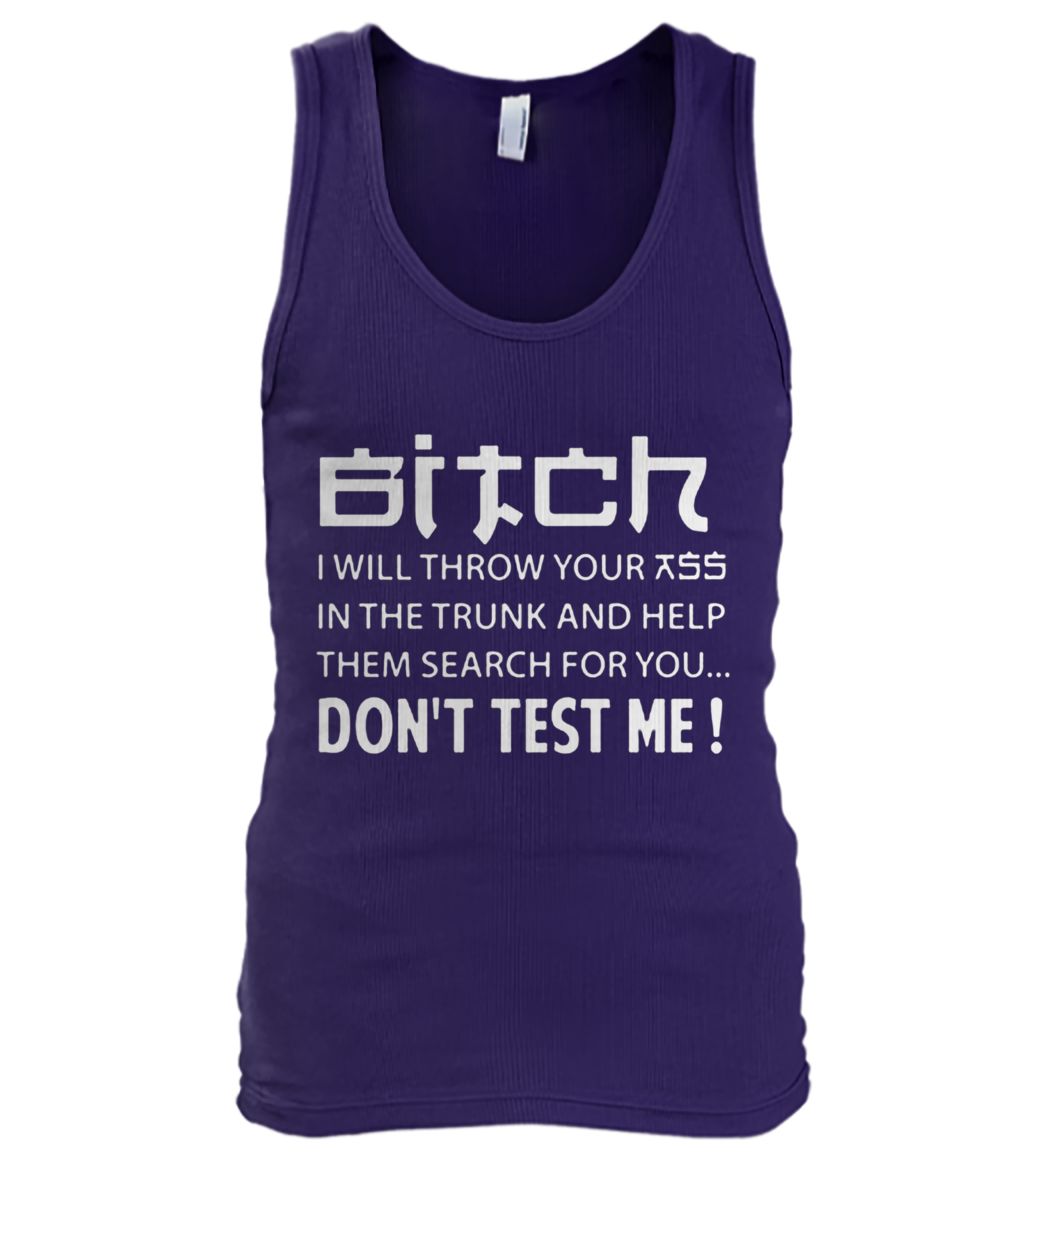 Bitch I will throw your ass in the trunk and help them search for you don't test me men's tank top